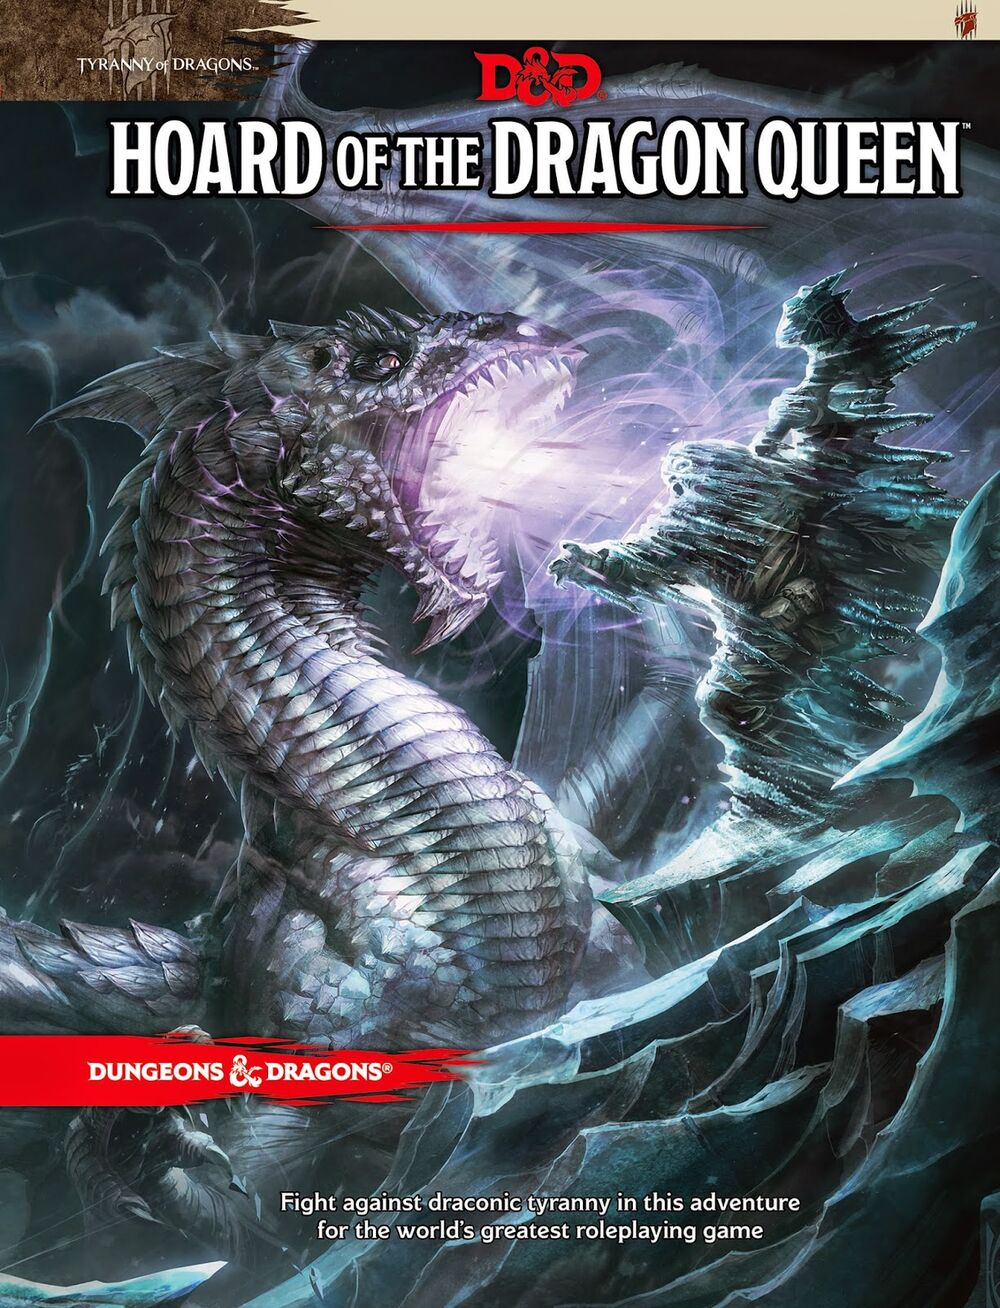 Dungeons & Dragons: Tyranny of Dragons: Hoard of the Dragon Queen